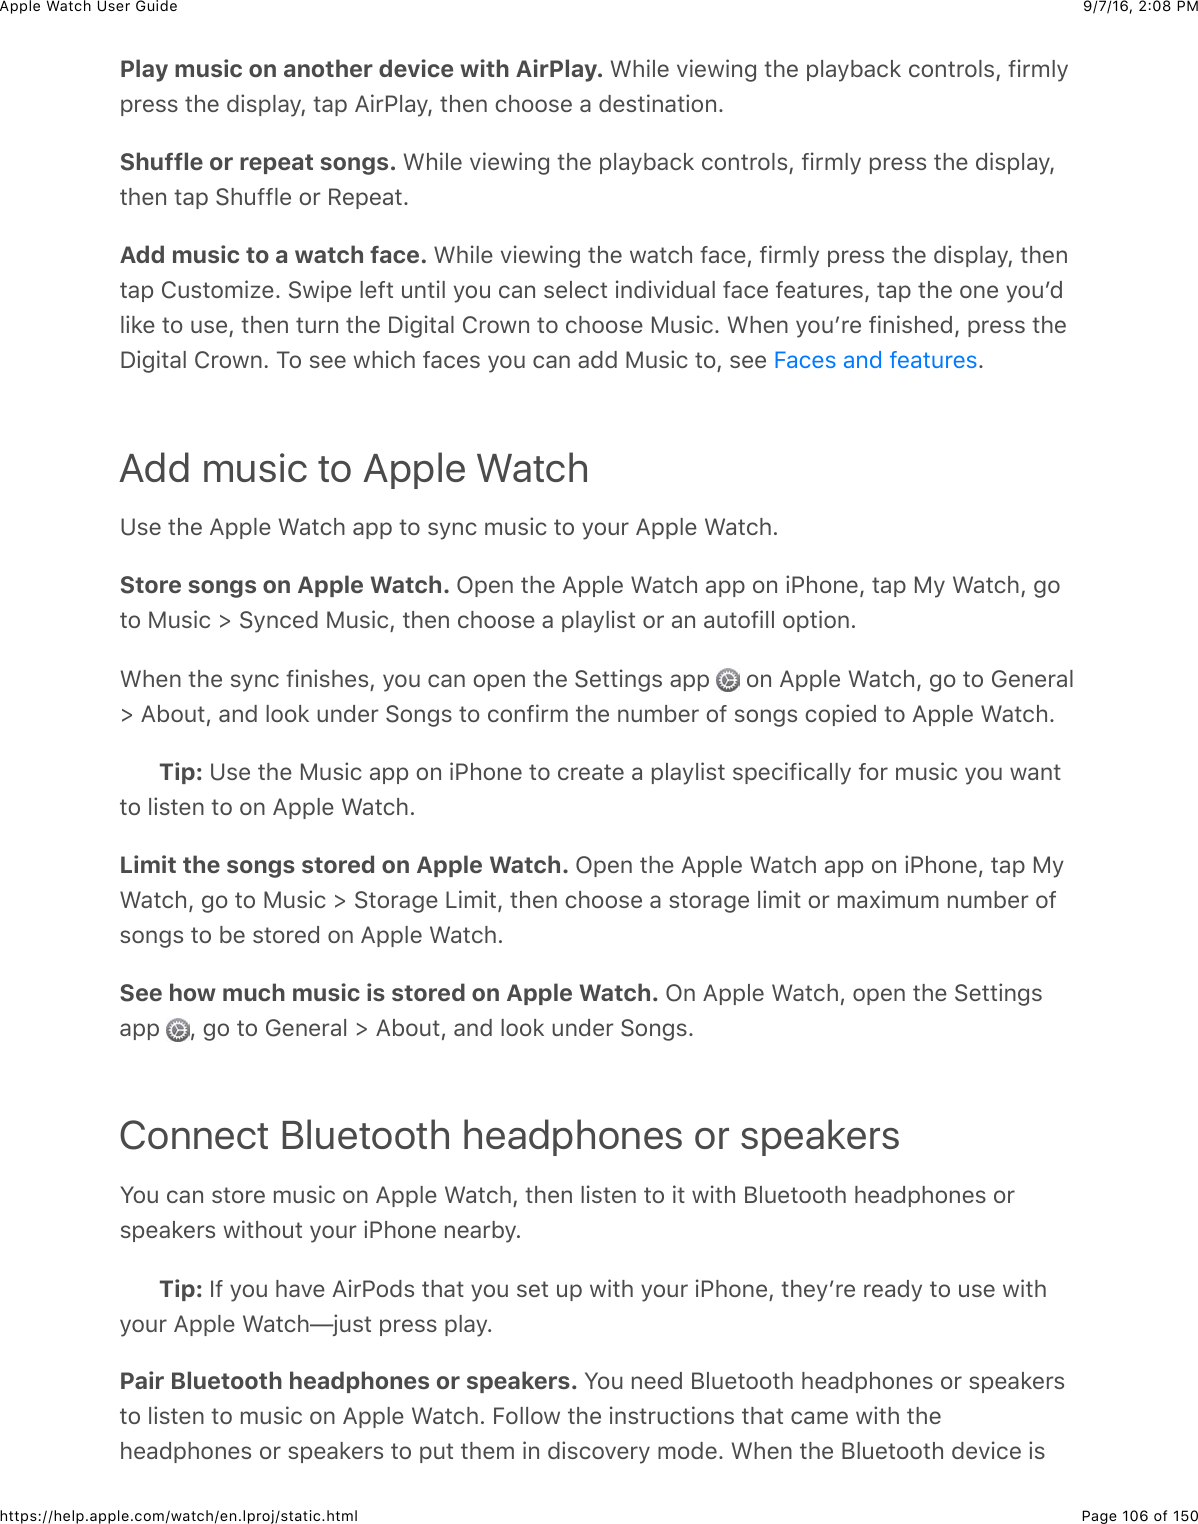 9/7/16, 2)08 PMApple Watch User GuidePage 106 of 150https://help.apple.com/watch/en.lproj/static.htmlPlay music on another device with AirPlay. &gt;)+&quot;%&amp;.+%7+,-&amp;3)%&amp;2&quot;&apos;/B&apos;(8&amp;(#,3*#&quot;$J&amp;@+*5&quot;/2*%$$&amp;3)%&amp;0+$2&quot;&apos;/J&amp;3&apos;2&amp;=+*G&quot;&apos;/J&amp;3)%,&amp;()##$%&amp;&apos;&amp;0%$3+,&apos;3+#,CShuffle or repeat songs. &gt;)+&quot;%&amp;.+%7+,-&amp;3)%&amp;2&quot;&apos;/B&apos;(8&amp;(#,3*#&quot;$J&amp;@+*5&quot;/&amp;2*%$$&amp;3)%&amp;0+$2&quot;&apos;/J3)%,&amp;3&apos;2&amp;6)4@@&quot;%&amp;#*&amp;H%2%&apos;3CAdd music to a watch face. &gt;)+&quot;%&amp;.+%7+,-&amp;3)%&amp;7&apos;3()&amp;@&apos;(%J&amp;@+*5&quot;/&amp;2*%$$&amp;3)%&amp;0+$2&quot;&apos;/J&amp;3)%,3&apos;2&amp;!4$3#5+N%C&amp;67+2%&amp;&quot;%@3&amp;4,3+&quot;&amp;/#4&amp;(&apos;,&amp;$%&quot;%(3&amp;+,0+.+04&apos;&quot;&amp;@&apos;(%&amp;@%&apos;34*%$J&amp;3&apos;2&amp;3)%&amp;#,%&amp;/#4W0&quot;+8%&amp;3#&amp;4$%J&amp;3)%,&amp;34*,&amp;3)%&amp;I+-+3&apos;&quot;&amp;!*#7,&amp;3#&amp;()##$%&amp;F4$+(C&amp;&gt;)%,&amp;/#4W*%&amp;@+,+$)%0J&amp;2*%$$&amp;3)%I+-+3&apos;&quot;&amp;!*#7,C&amp;1#&amp;$%%&amp;7)+()&amp;@&apos;(%$&amp;/#4&amp;(&apos;,&amp;&apos;00&amp;F4$+(&amp;3#J&amp;$%%&amp; CAdd music to Apple WatchK$%&amp;3)%&amp;=22&quot;%&amp;&gt;&apos;3()&amp;&apos;22&amp;3#&amp;$/,(&amp;54$+(&amp;3#&amp;/#4*&amp;=22&quot;%&amp;&gt;&apos;3()CStore songs on Apple Watch. L2%,&amp;3)%&amp;=22&quot;%&amp;&gt;&apos;3()&amp;&apos;22&amp;#,&amp;+G)#,%J&amp;3&apos;2&amp;F/&amp;&gt;&apos;3()J&amp;-#3#&amp;F4$+(&amp;d&amp;6/,(%0&amp;F4$+(J&amp;3)%,&amp;()##$%&amp;&apos;&amp;2&quot;&apos;/&quot;+$3&amp;#*&amp;&apos;,&amp;&apos;43#@+&quot;&quot;&amp;#23+#,C&gt;)%,&amp;3)%&amp;$/,(&amp;@+,+$)%$J&amp;/#4&amp;(&apos;,&amp;#2%,&amp;3)%&amp;6%33+,-$&amp;&apos;22&amp; &amp;#,&amp;=22&quot;%&amp;&gt;&apos;3()J&amp;-#&amp;3#&amp;D%,%*&apos;&quot;d&amp;=B#43J&amp;&apos;,0&amp;&quot;##8&amp;4,0%*&amp;6#,-$&amp;3#&amp;(#,@+*5&amp;3)%&amp;,45B%*&amp;#@&amp;$#,-$&amp;(#2+%0&amp;3#&amp;=22&quot;%&amp;&gt;&apos;3()CTip: K$%&amp;3)%&amp;F4$+(&amp;&apos;22&amp;#,&amp;+G)#,%&amp;3#&amp;(*%&apos;3%&amp;&apos;&amp;2&quot;&apos;/&quot;+$3&amp;$2%(+@+(&apos;&quot;&quot;/&amp;@#*&amp;54$+(&amp;/#4&amp;7&apos;,33#&amp;&quot;+$3%,&amp;3#&amp;#,&amp;=22&quot;%&amp;&gt;&apos;3()CLimit the songs stored on Apple Watch. L2%,&amp;3)%&amp;=22&quot;%&amp;&gt;&apos;3()&amp;&apos;22&amp;#,&amp;+G)#,%J&amp;3&apos;2&amp;F/&gt;&apos;3()J&amp;-#&amp;3#&amp;F4$+(&amp;d&amp;63#*&apos;-%&amp;&lt;+5+3J&amp;3)%,&amp;()##$%&amp;&apos;&amp;$3#*&apos;-%&amp;&quot;+5+3&amp;#*&amp;5&apos;U+545&amp;,45B%*&amp;#@$#,-$&amp;3#&amp;B%&amp;$3#*%0&amp;#,&amp;=22&quot;%&amp;&gt;&apos;3()CSee how much music is stored on Apple Watch. L,&amp;=22&quot;%&amp;&gt;&apos;3()J&amp;#2%,&amp;3)%&amp;6%33+,-$&apos;22&amp; J&amp;-#&amp;3#&amp;D%,%*&apos;&quot;&amp;d&amp;=B#43J&amp;&apos;,0&amp;&quot;##8&amp;4,0%*&amp;6#,-$CConnect Bluetooth headphones or speakersS#4&amp;(&apos;,&amp;$3#*%&amp;54$+(&amp;#,&amp;=22&quot;%&amp;&gt;&apos;3()J&amp;3)%,&amp;&quot;+$3%,&amp;3#&amp;+3&amp;7+3)&amp;;&quot;4%3##3)&amp;)%&apos;02)#,%$&amp;#*$2%&apos;8%*$&amp;7+3)#43&amp;/#4*&amp;+G)#,%&amp;,%&apos;*B/CTip: Y@&amp;/#4&amp;)&apos;.%&amp;=+*G#0$&amp;3)&apos;3&amp;/#4&amp;$%3&amp;42&amp;7+3)&amp;/#4*&amp;+G)#,%J&amp;3)%/W*%&amp;*%&apos;0/&amp;3#&amp;4$%&amp;7+3)/#4*&amp;=22&quot;%&amp;&gt;&apos;3()TO4$3&amp;2*%$$&amp;2&quot;&apos;/CPair Bluetooth headphones or speakers. S#4&amp;,%%0&amp;;&quot;4%3##3)&amp;)%&apos;02)#,%$&amp;#*&amp;$2%&apos;8%*$3#&amp;&quot;+$3%,&amp;3#&amp;54$+(&amp;#,&amp;=22&quot;%&amp;&gt;&apos;3()C&amp;E#&quot;&quot;#7&amp;3)%&amp;+,$3*4(3+#,$&amp;3)&apos;3&amp;(&apos;5%&amp;7+3)&amp;3)%)%&apos;02)#,%$&amp;#*&amp;$2%&apos;8%*$&amp;3#&amp;243&amp;3)%5&amp;+,&amp;0+$(#.%*/&amp;5#0%C&amp;&gt;)%,&amp;3)%&amp;;&quot;4%3##3)&amp;0%.+(%&amp;+$E&apos;(%$&amp;&apos;,0&amp;@%&apos;34*%$